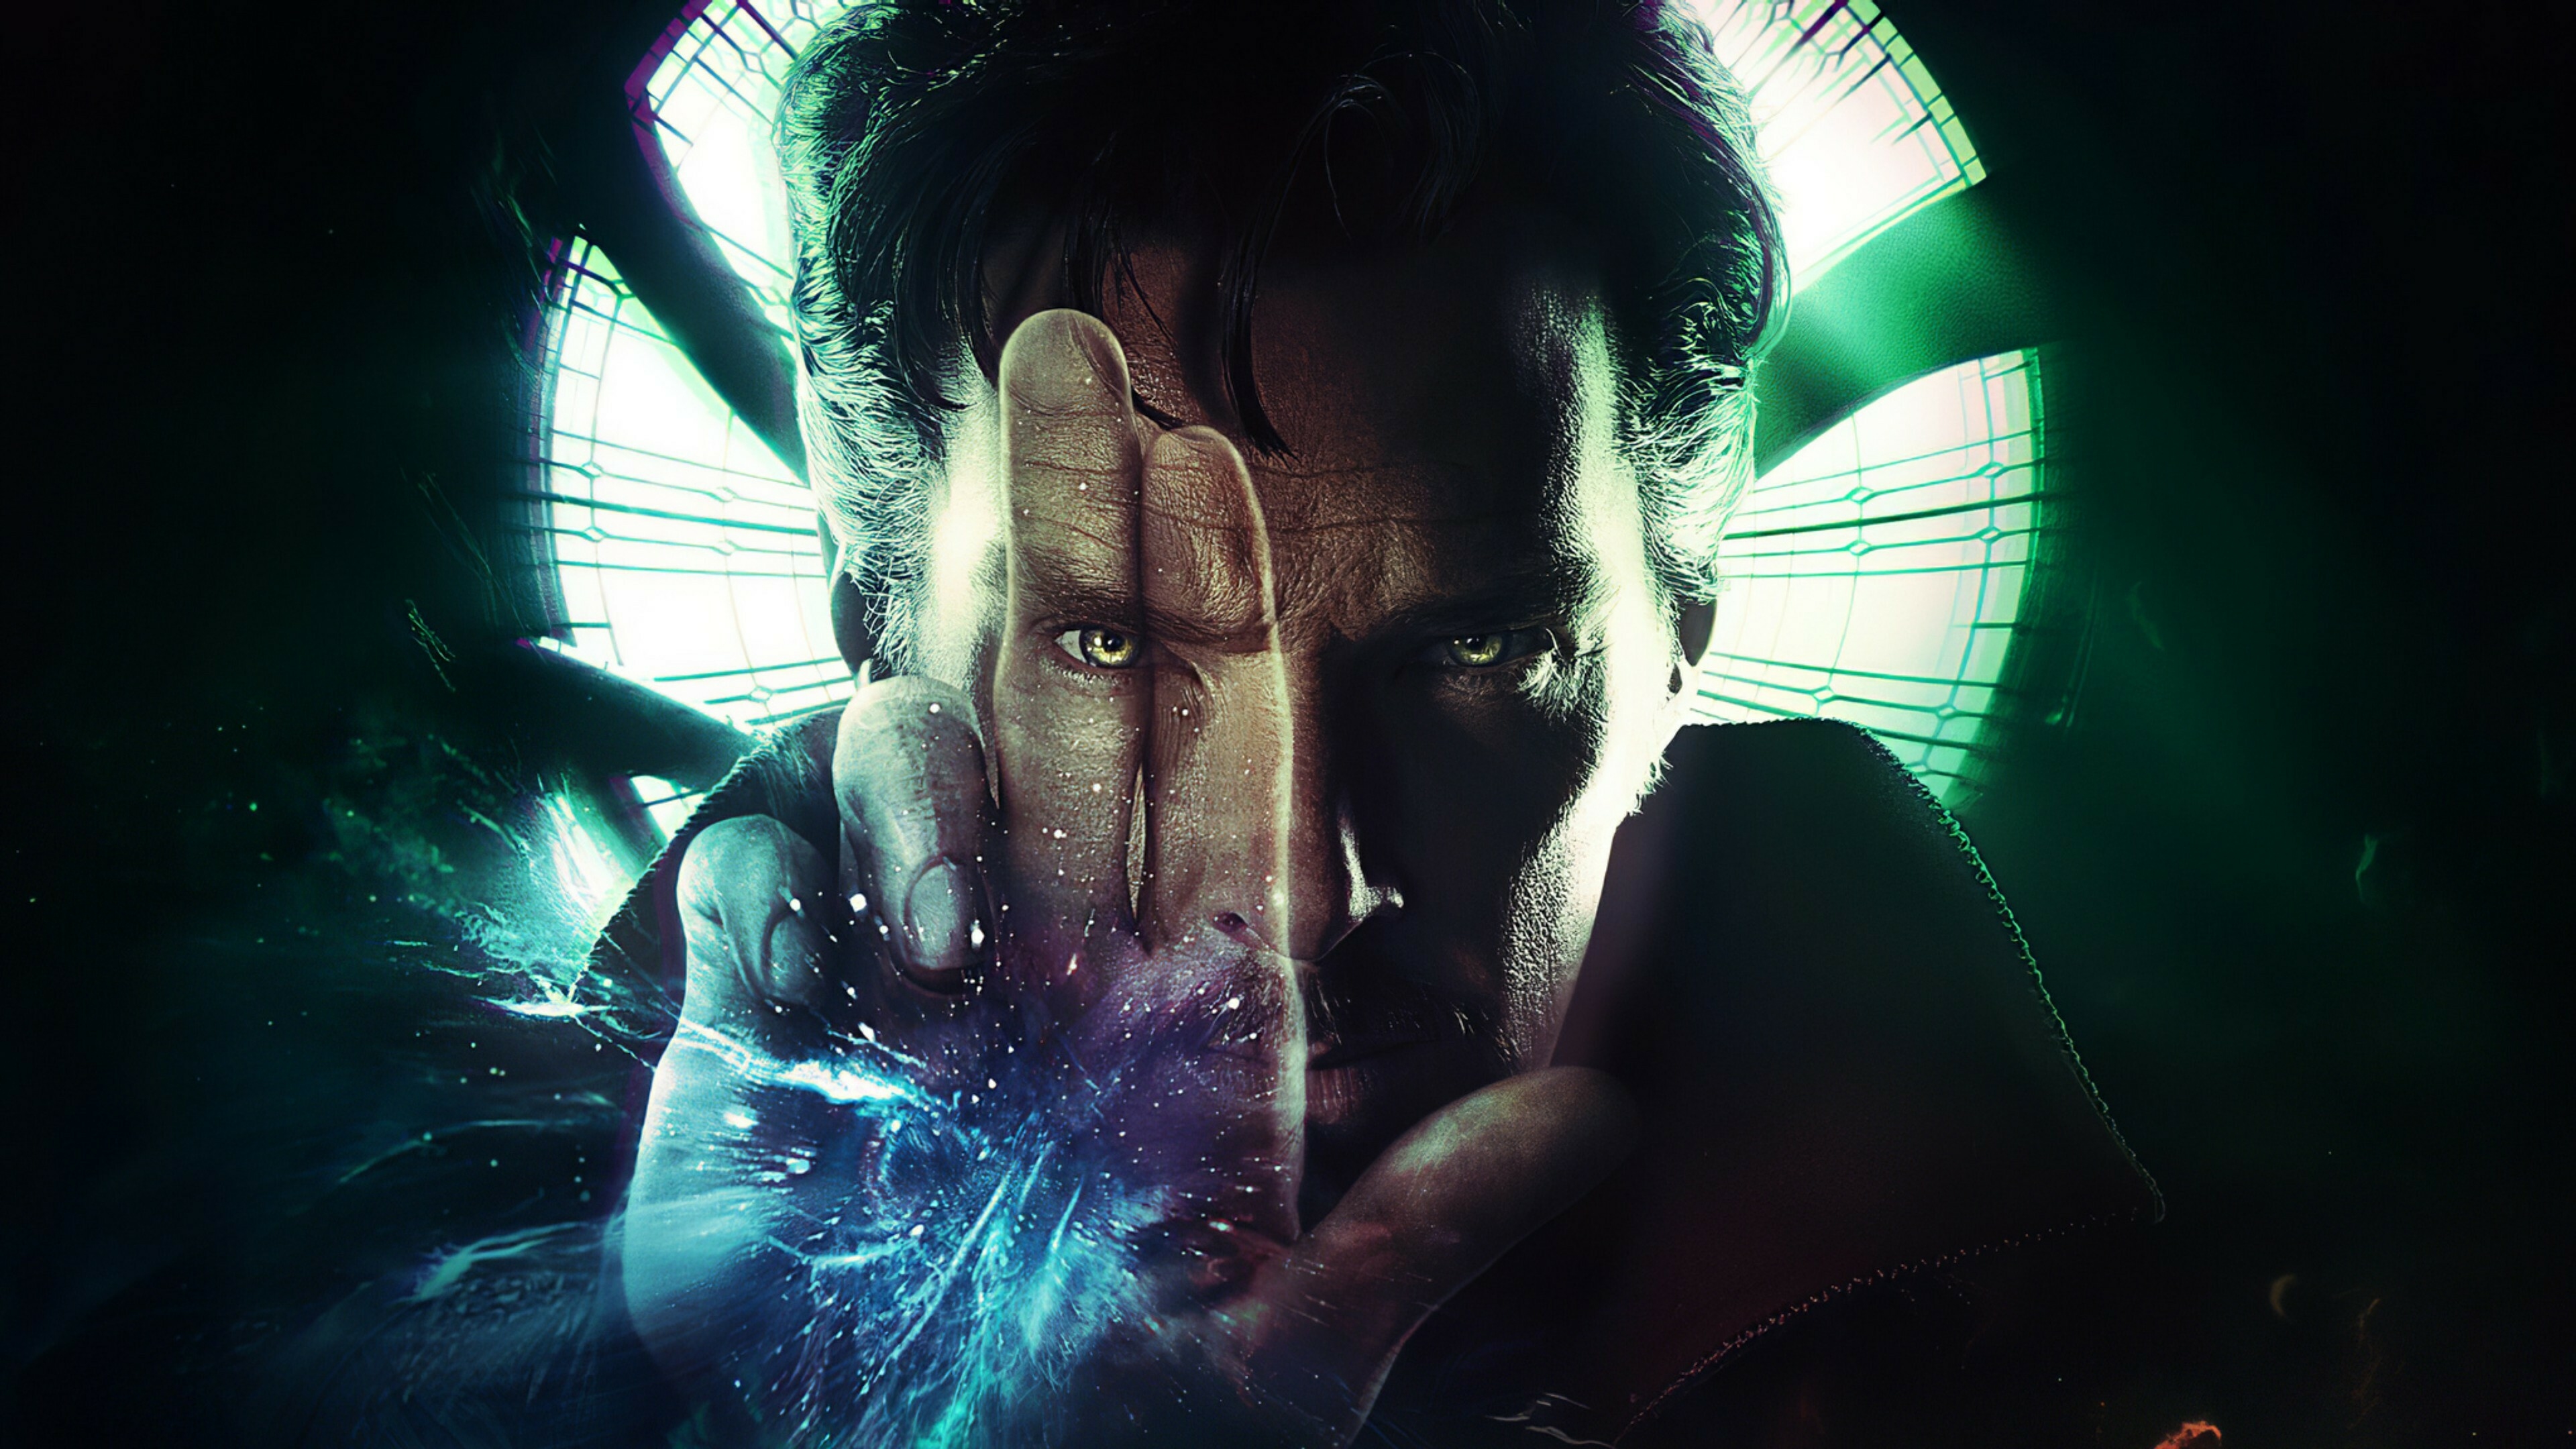 Download wallpaper 3840x2160 doctor strange in the multiverse of madness,  fantasy marvel movie, 2022 4k wallpaper, uhd wallpaper, 16:9 widescreen  3840x2160 hd background, 27573